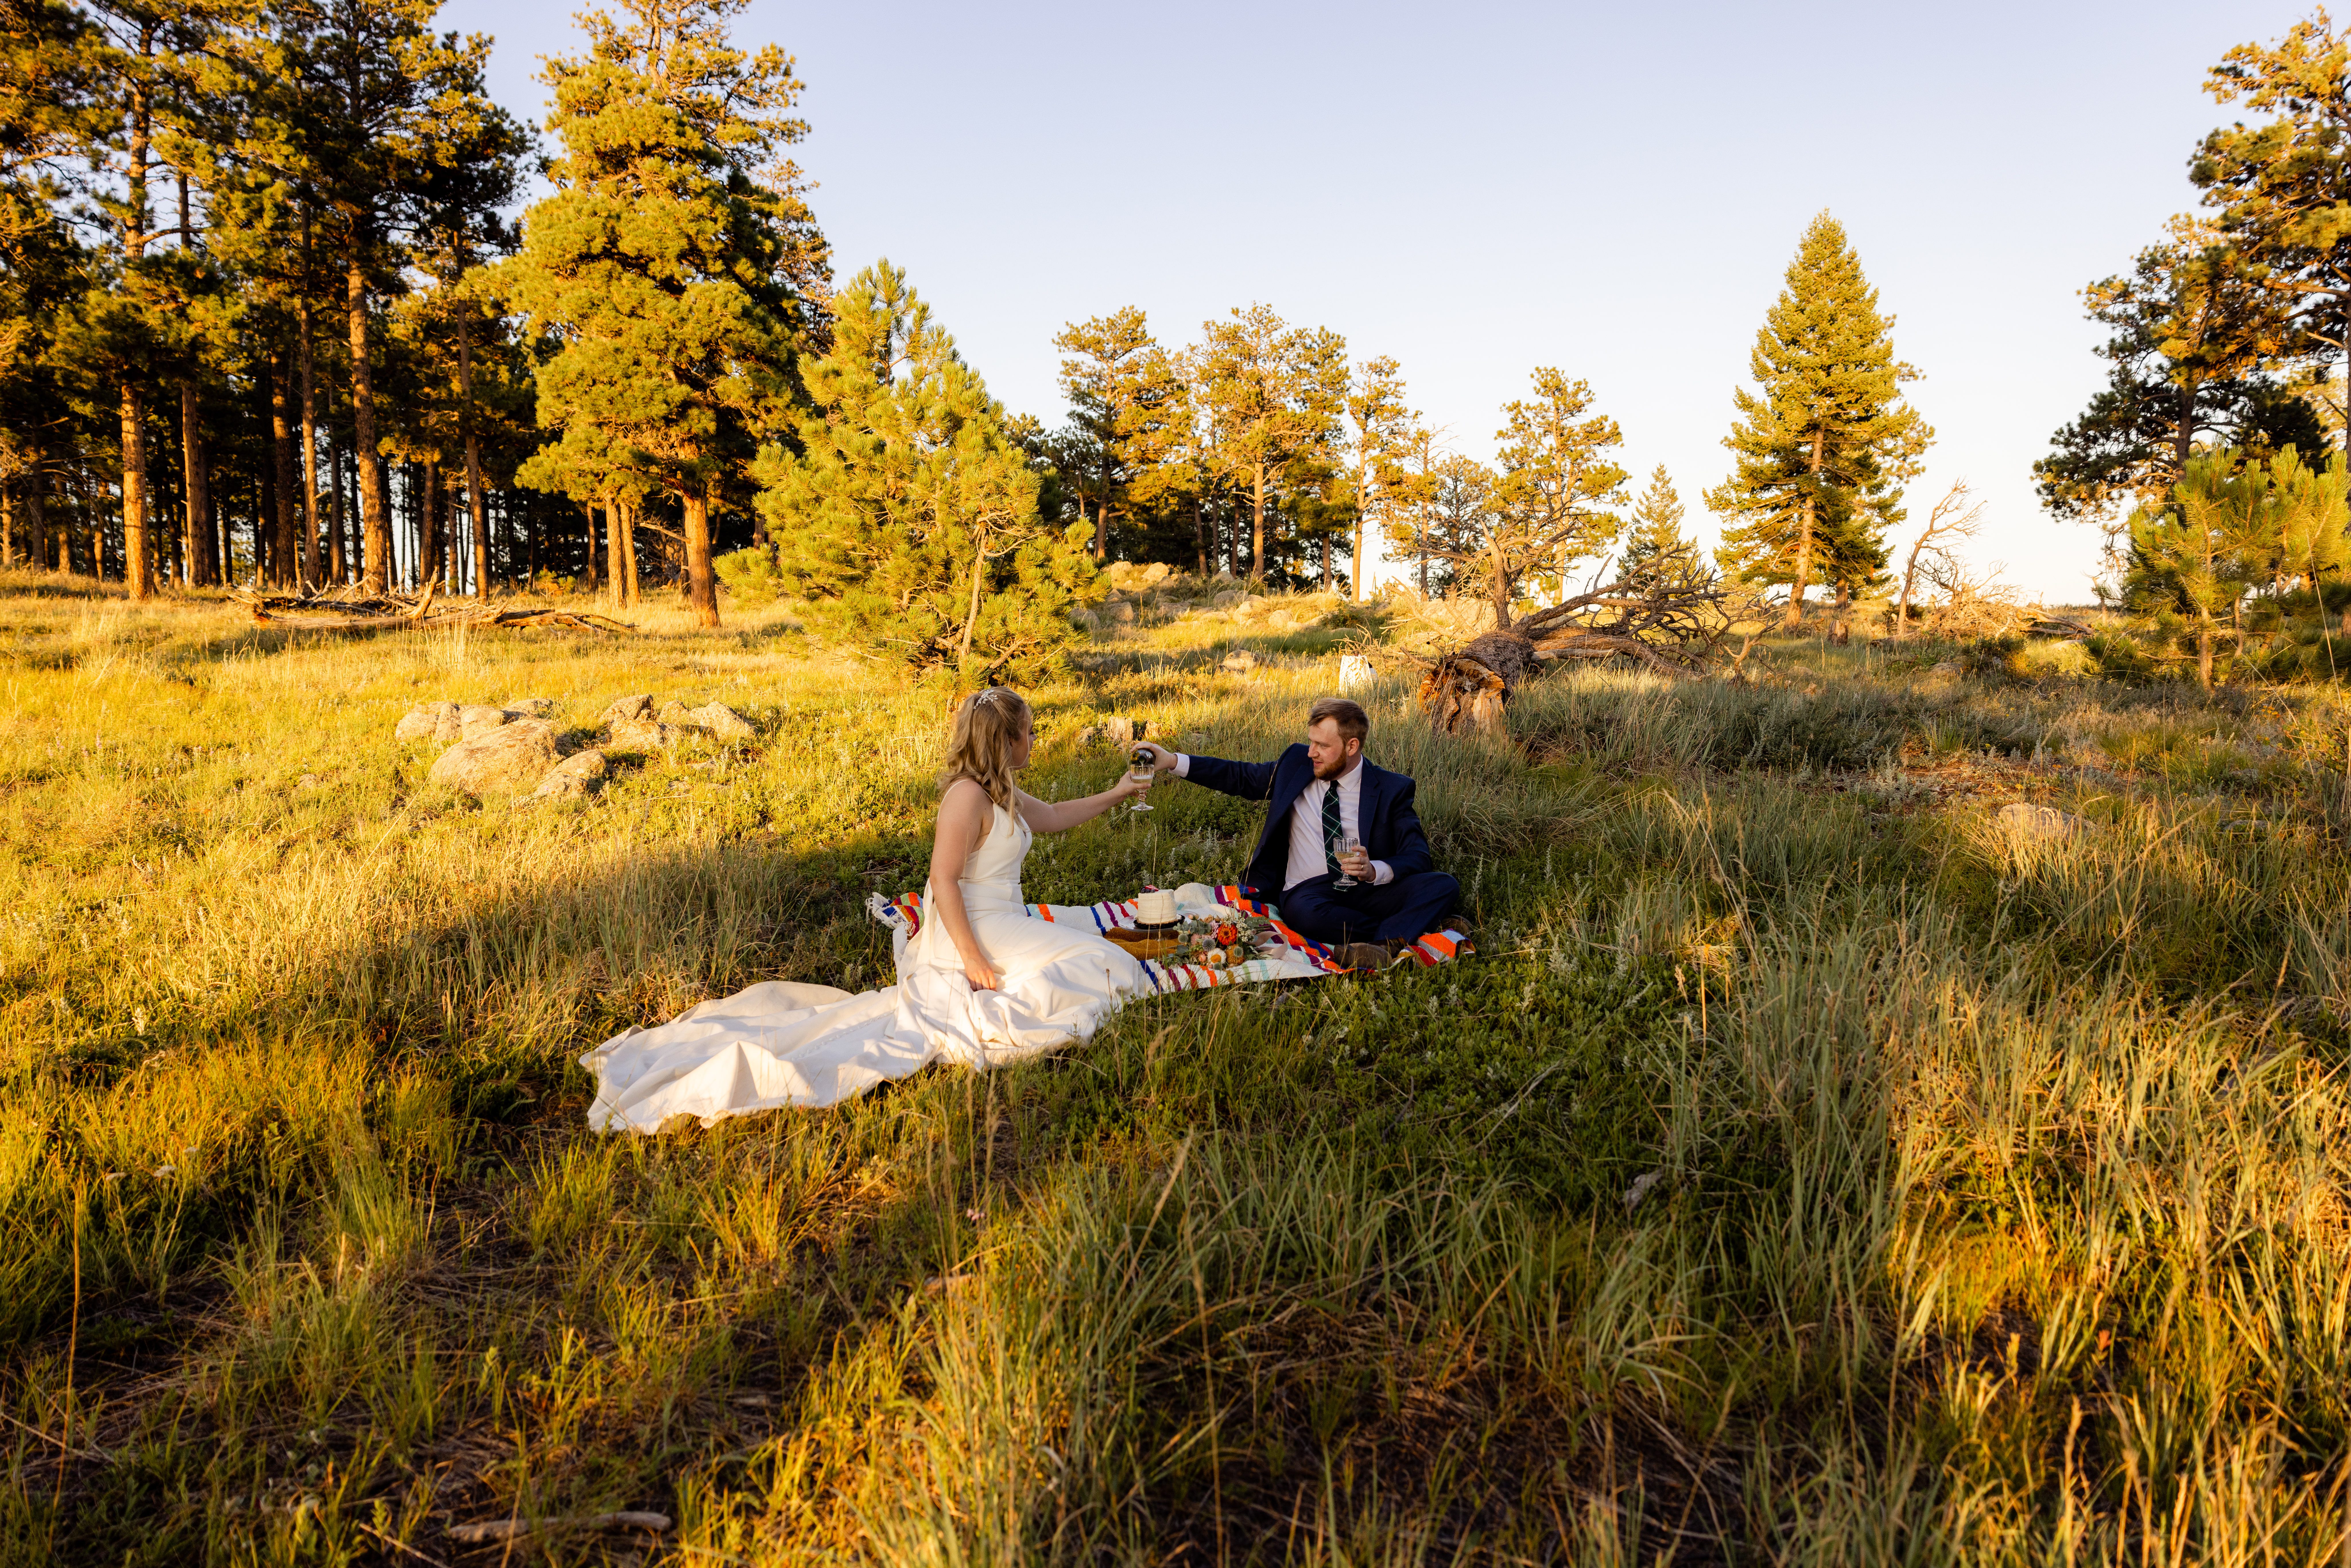 The bride and groom raising their glasses in a meadow after their Sunrise Amphitheater wedding.